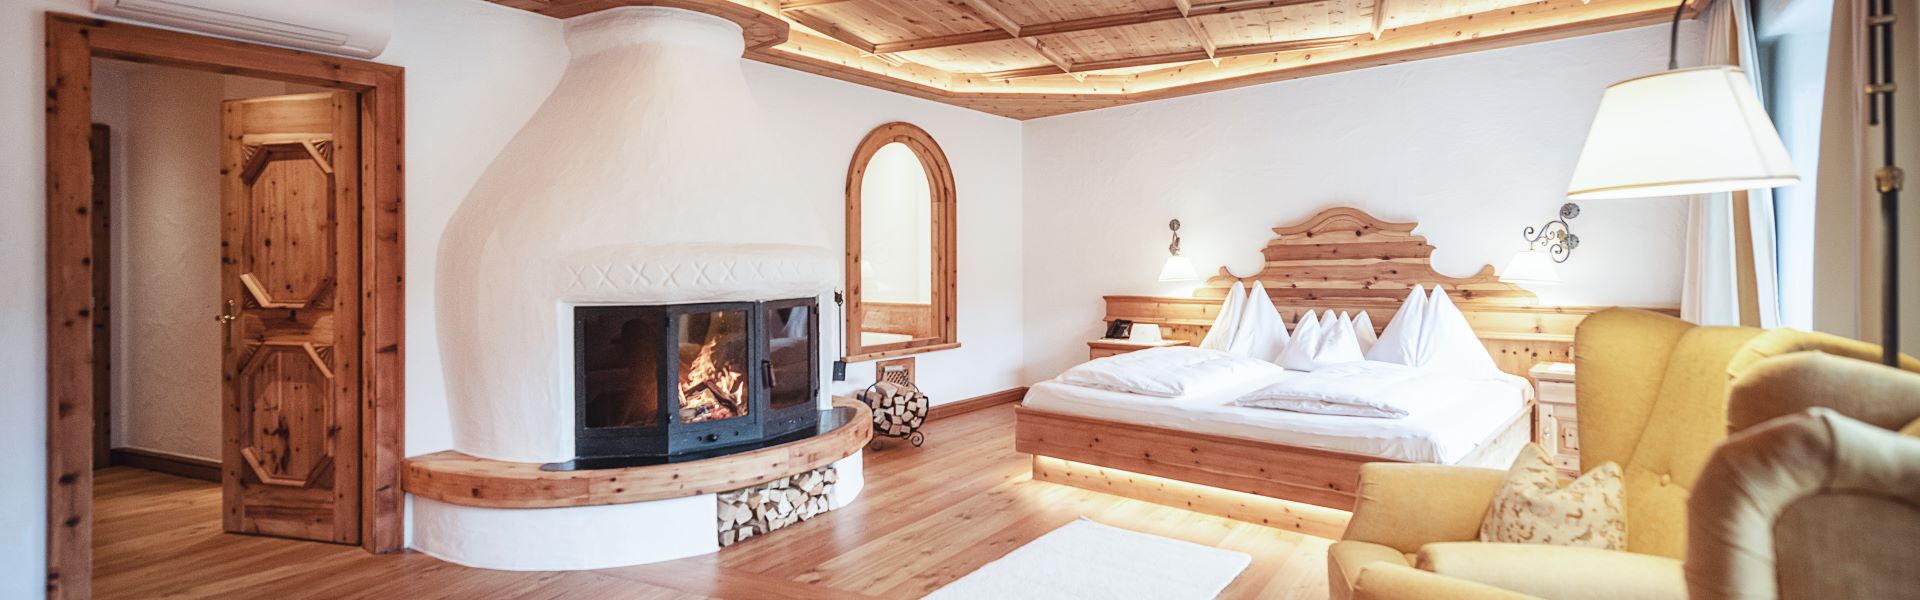 <strong>Rooms & suites</strong><br><br>In all our rooms and suites, lovingly decorated in traditional rustic style and finished off by hand, you'll find nothing but top-quality natural materials...